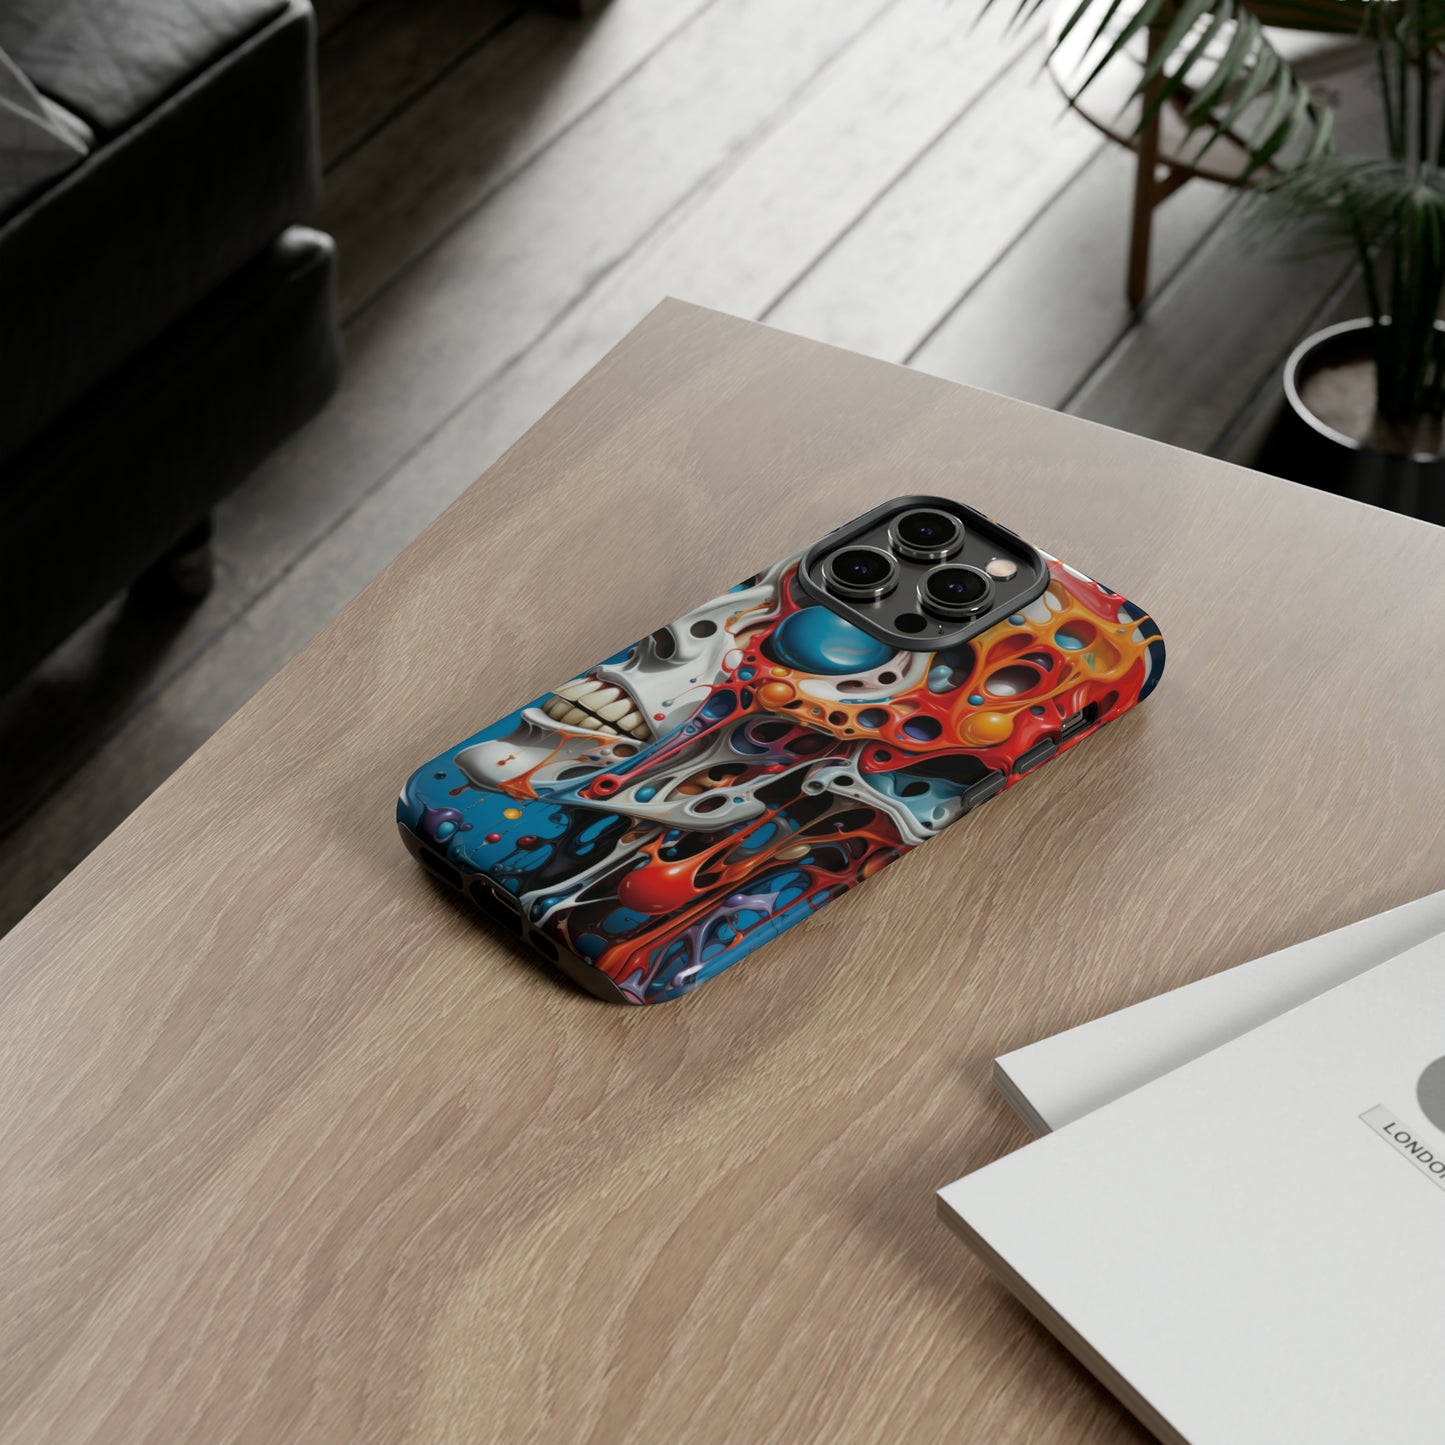 Melting Skull Spectrum Phone Case - Dripping Colors for iPhone, Samsung, Pixel